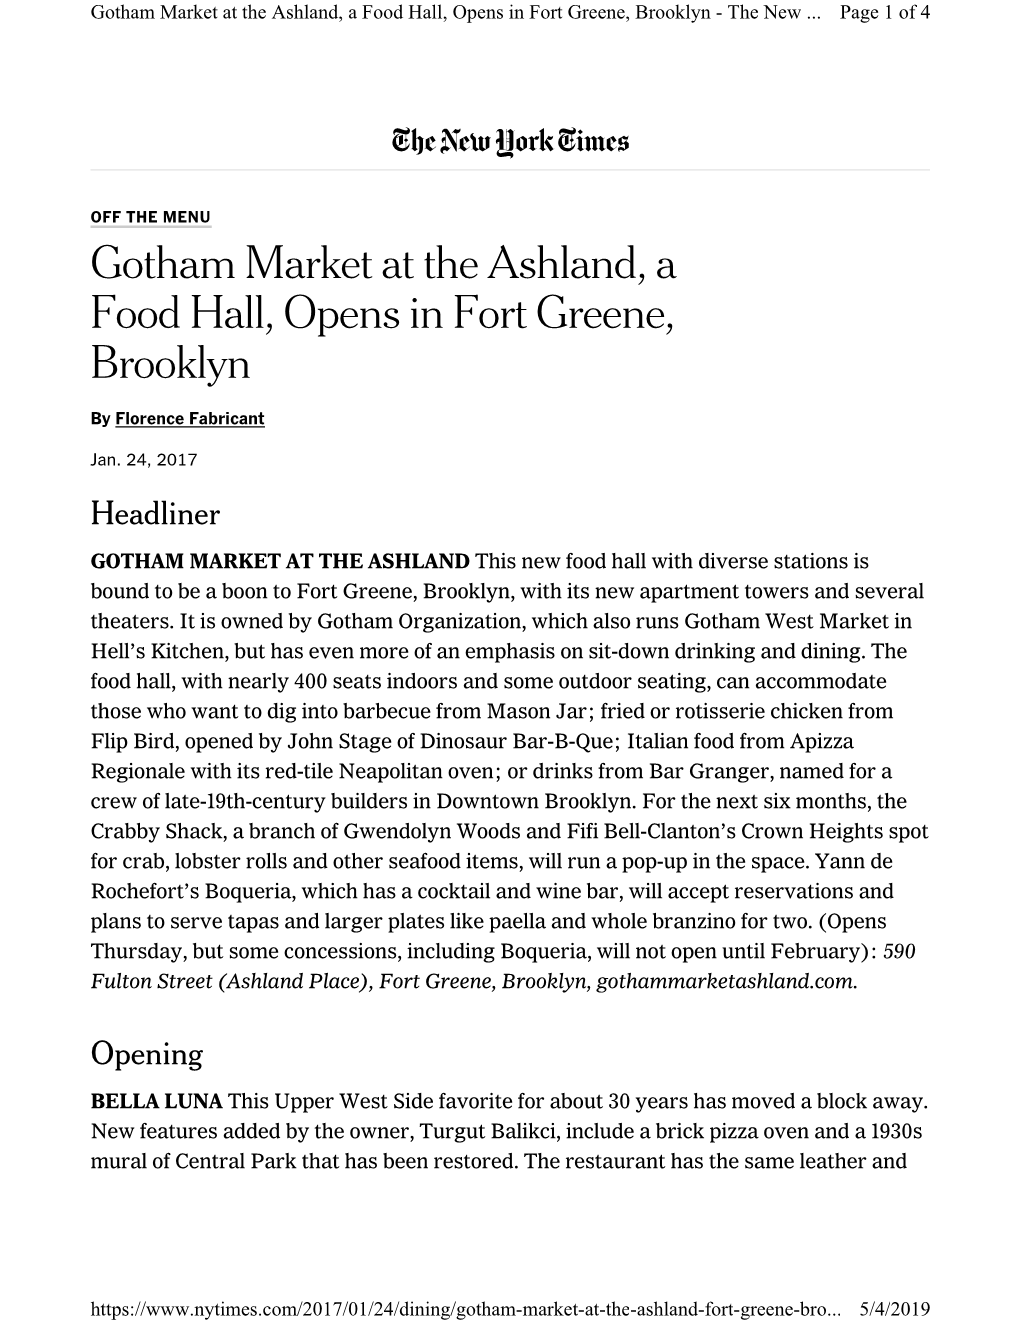 Gotham Market at the Ashland, a Food Hall, Opens in Fort Greene, Brooklyn - the New